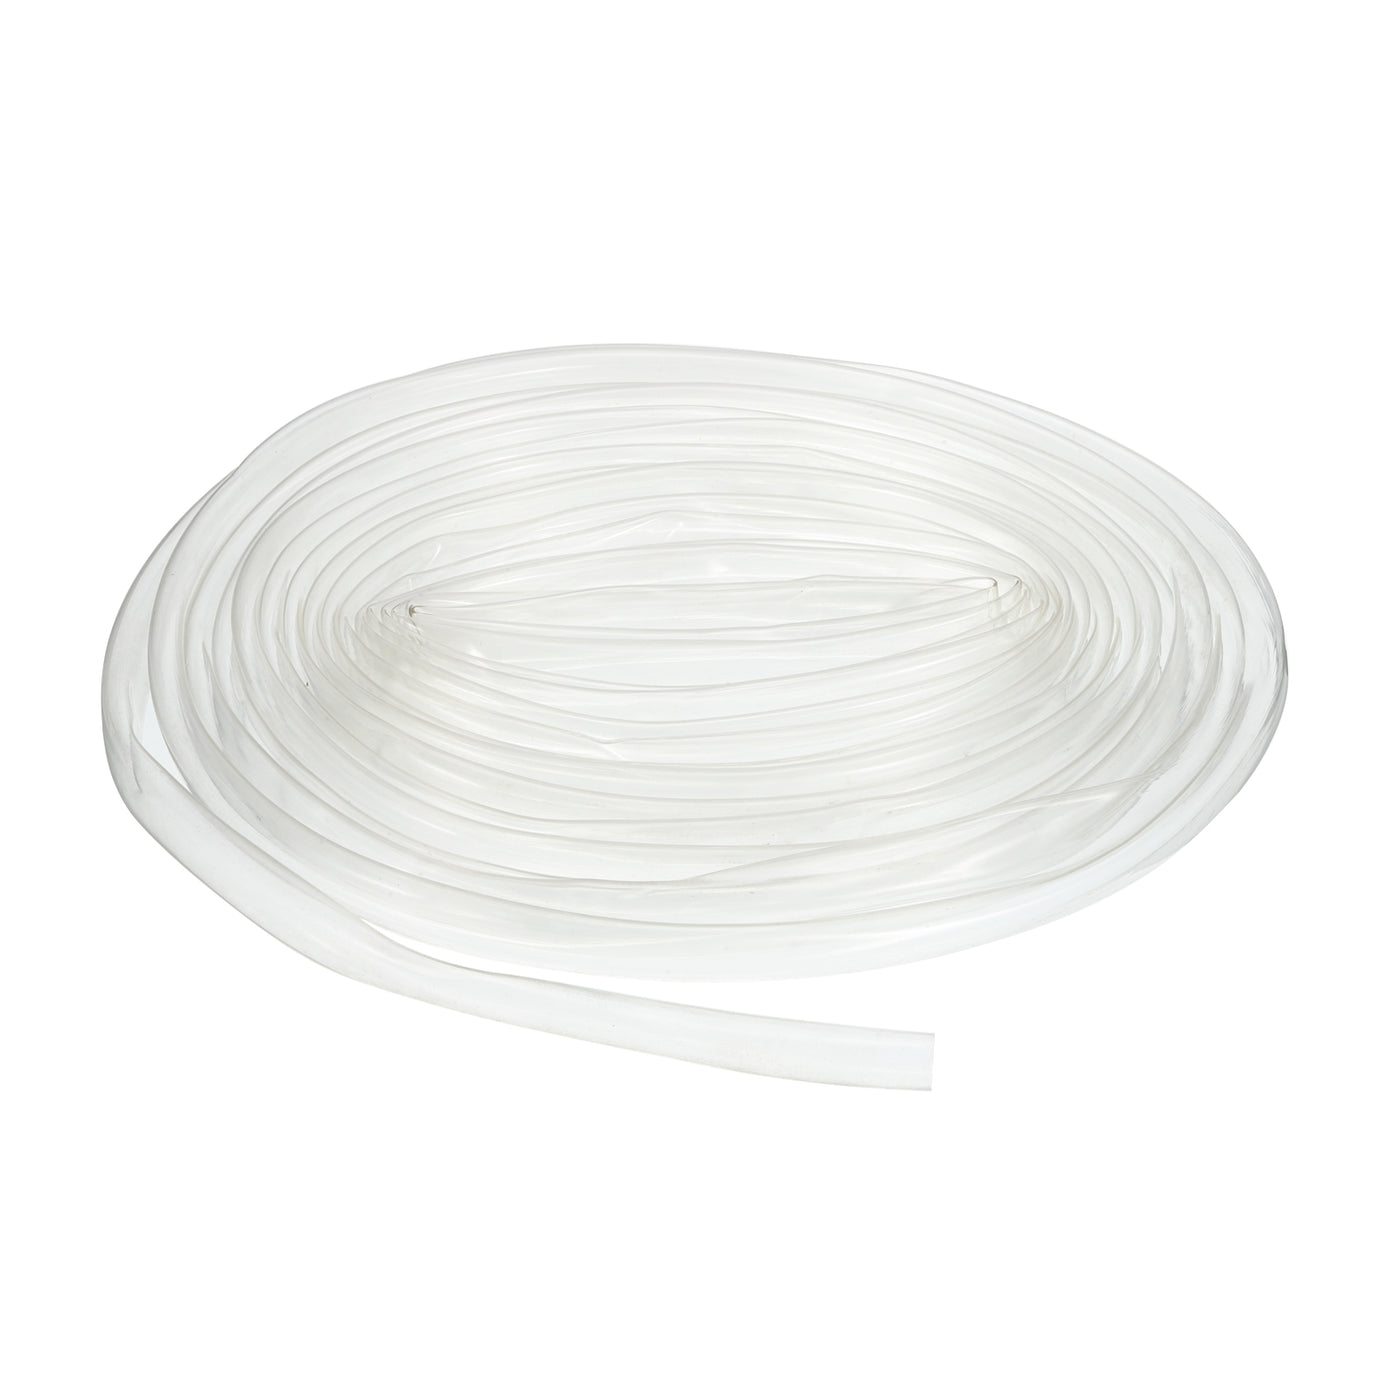 uxcell Uxcell Clear PVC Tube Wire Harness Tubing, 3/8-inch(10mm) ID 23ft Sleeve for Wire Sheathing Wire Protection